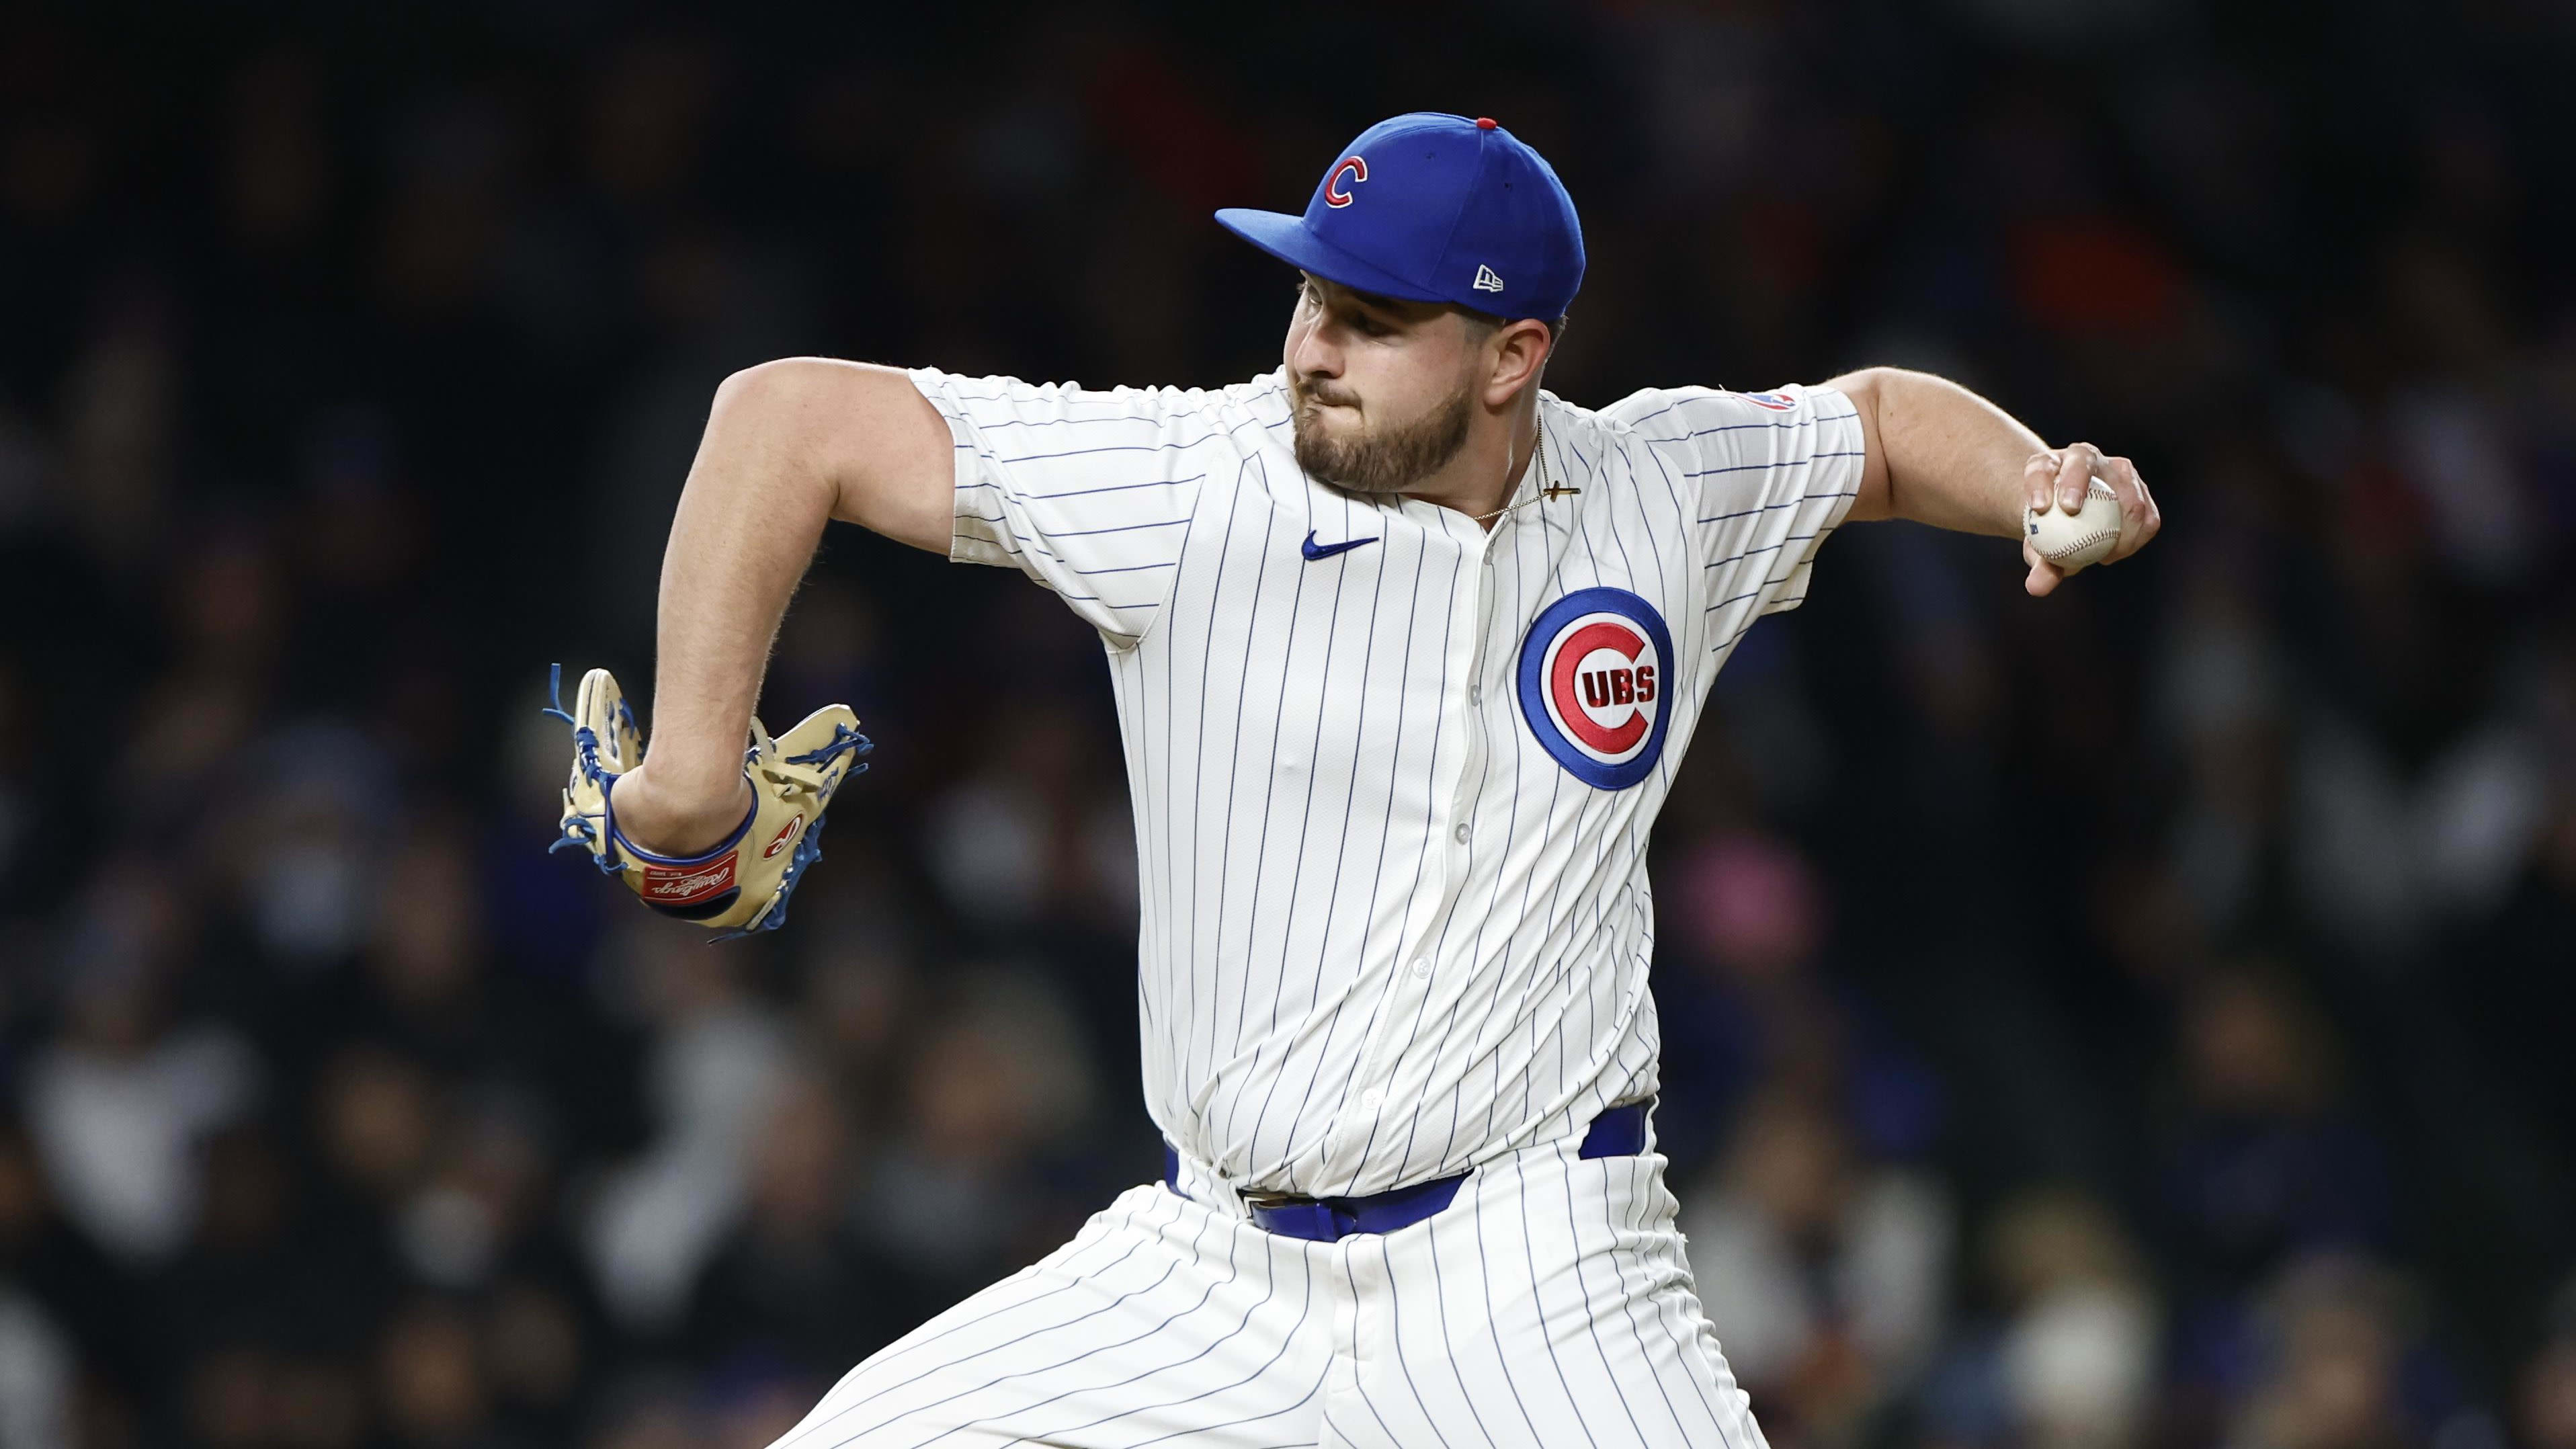 Umpire Makes Chicago Cubs Reliever Change Out Glove With American Flag